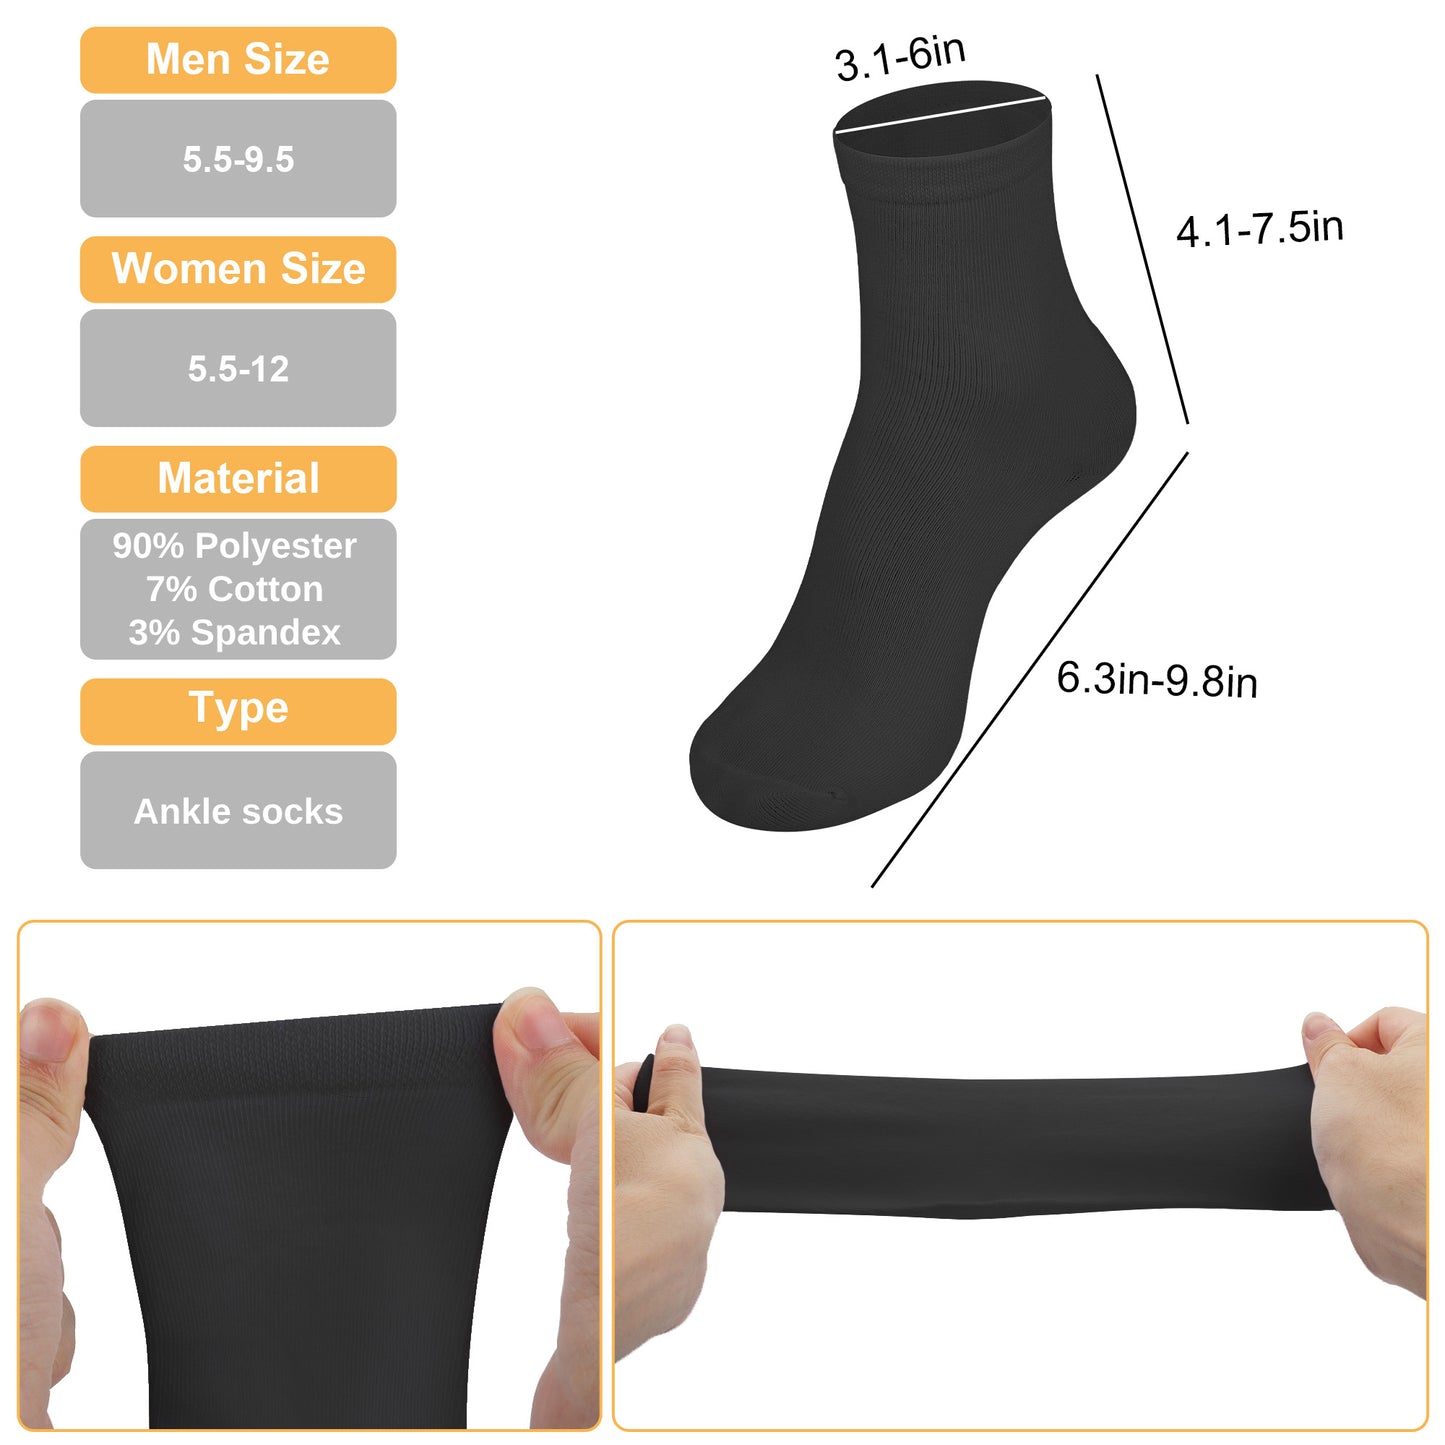 6 Pairs Unisex Ankle Socks - Women Men Athletic Short Cotton Socks Thin Lightweight Classic Casual Socks suitable for casual and athletic wear providing comfort and style (Black)